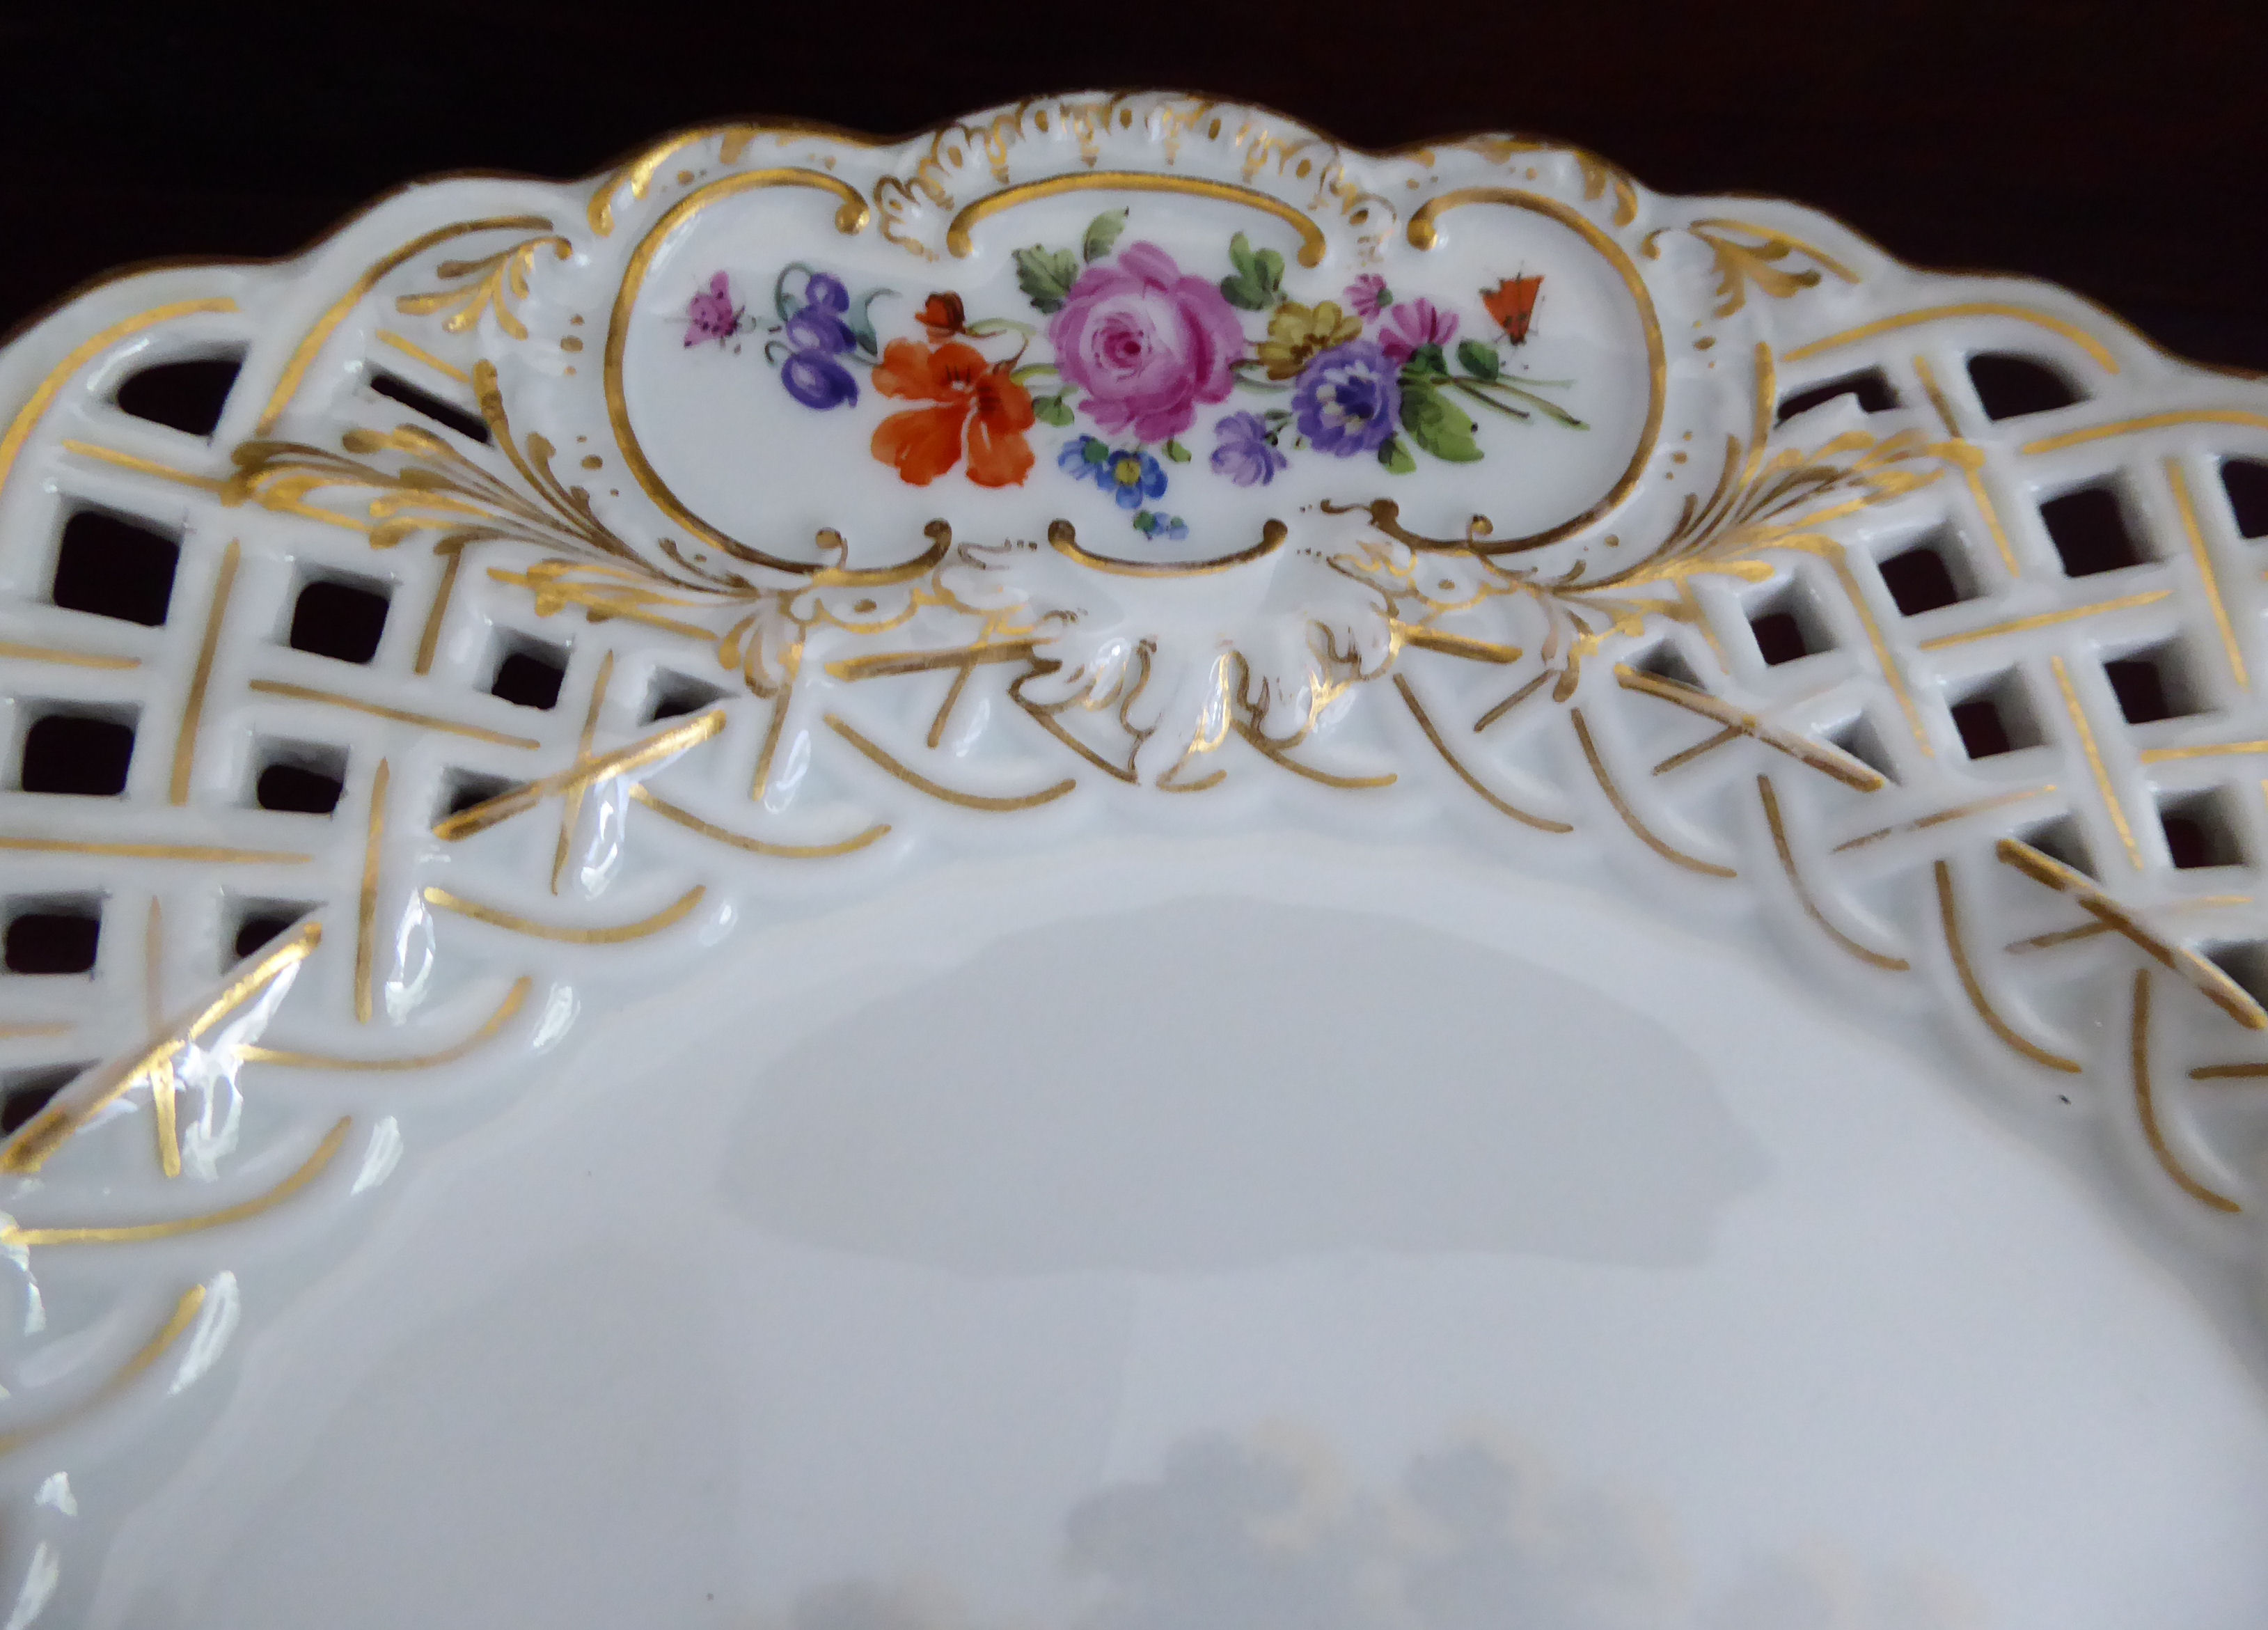 An early 20thC Meissen porcelain latticed plate with floral cartouches and figures wearing period - Image 3 of 6